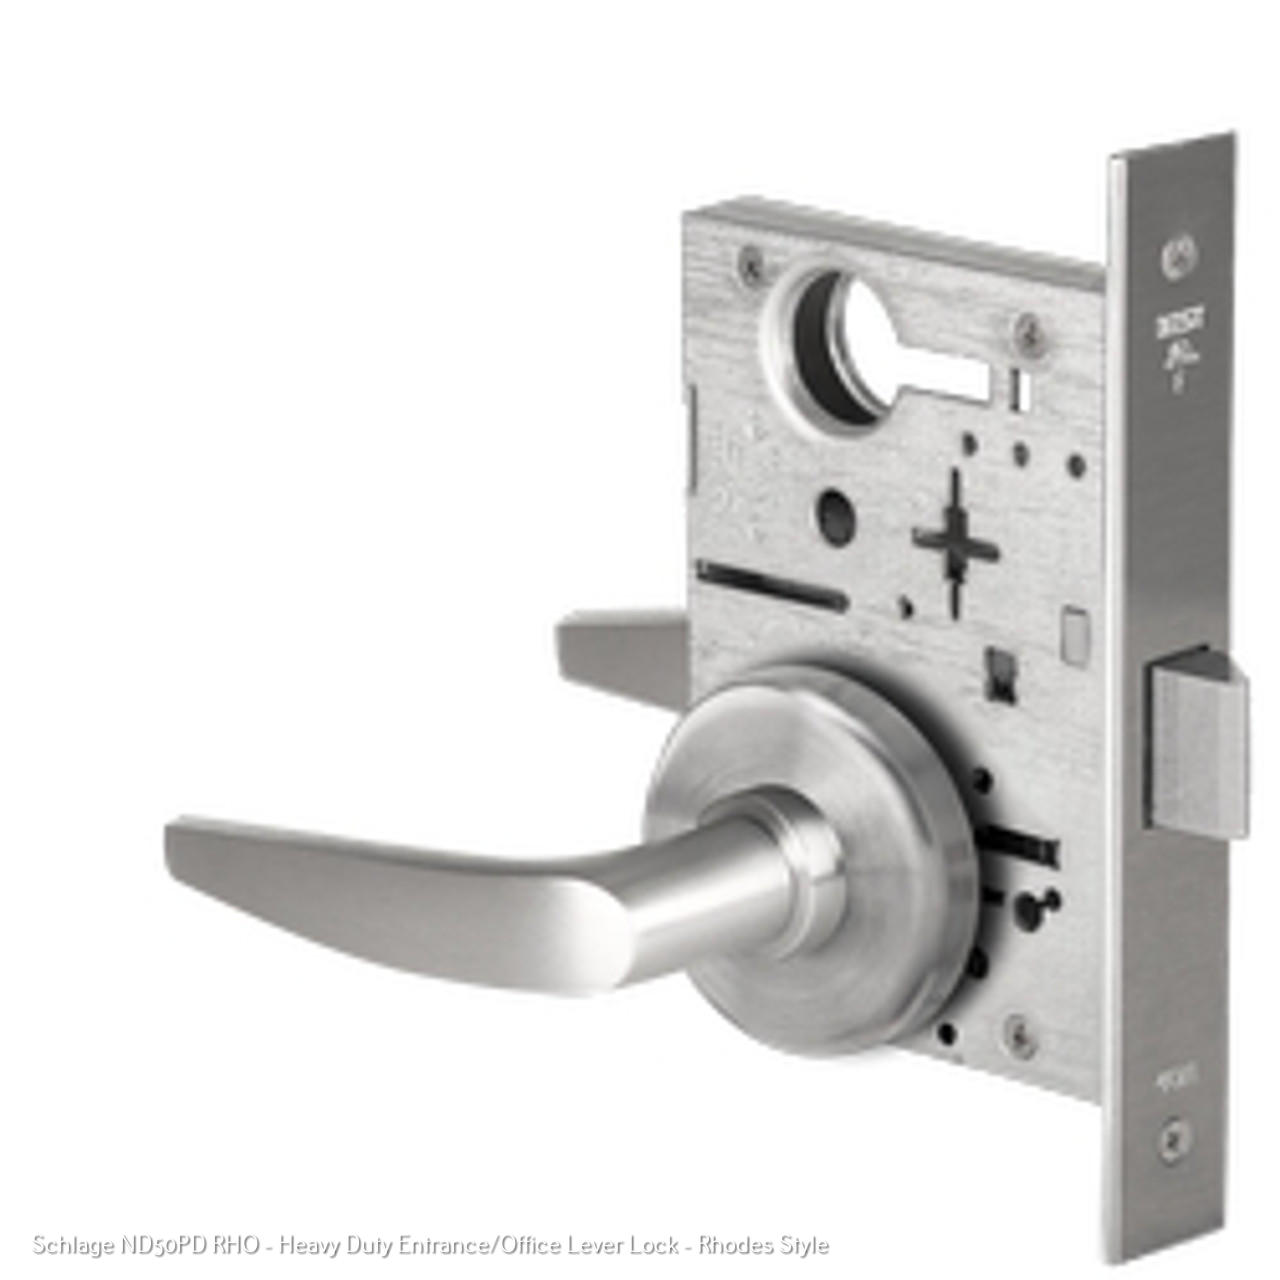 National Lock Supply Boasts A the Go-To Provider for Heavy Duty Privacy Lever Locks